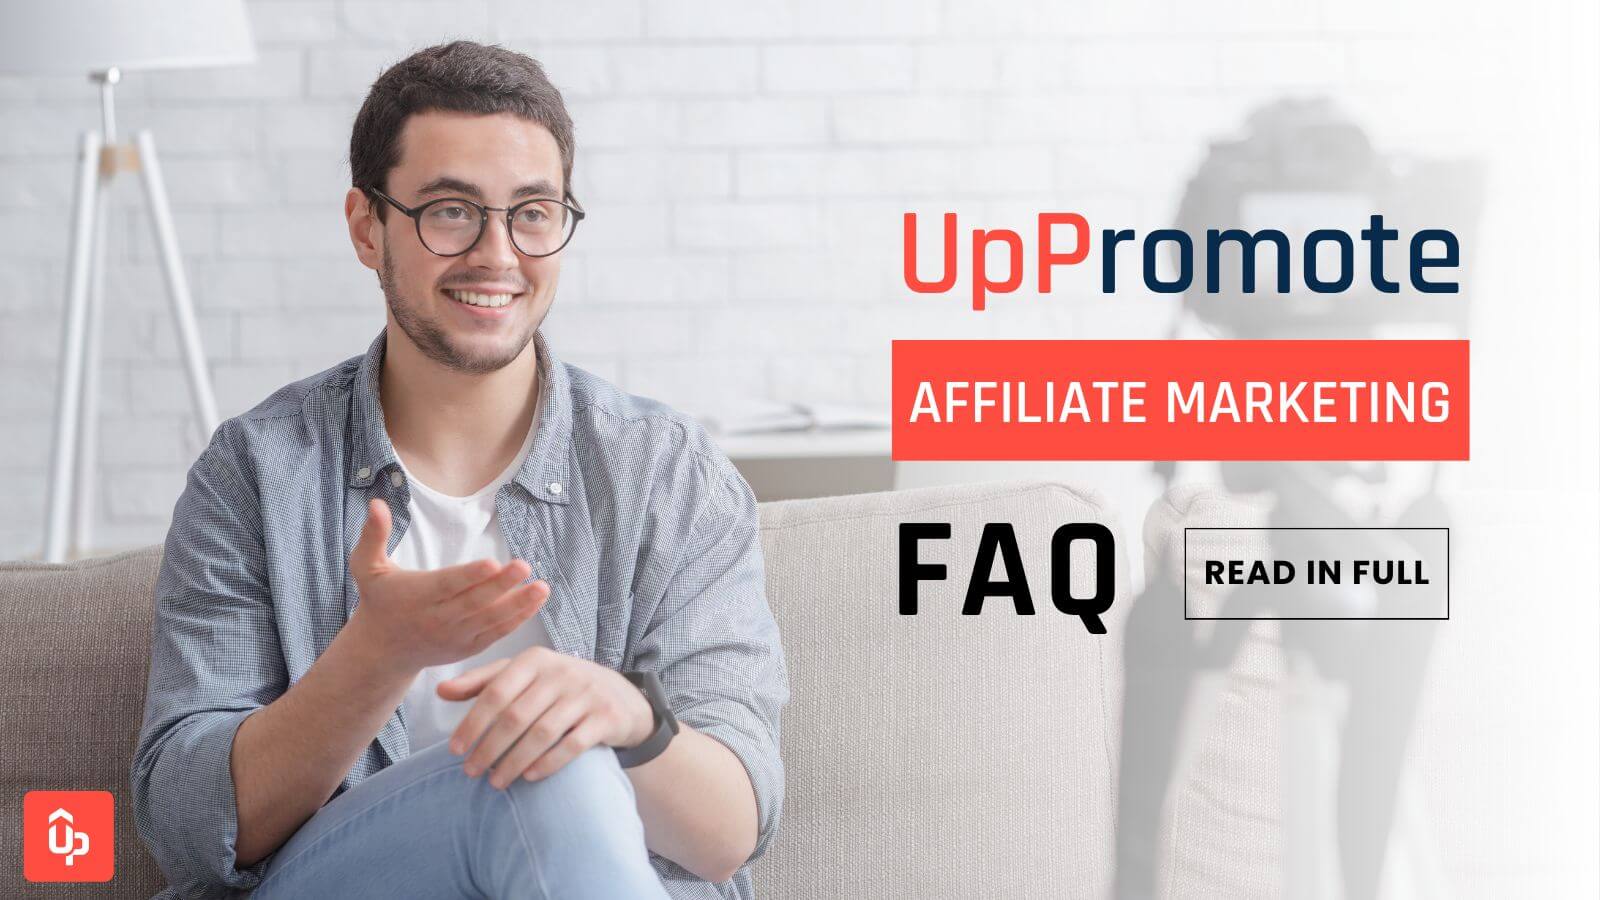 UpPromote Affiliate Marketing Frequently asked questions